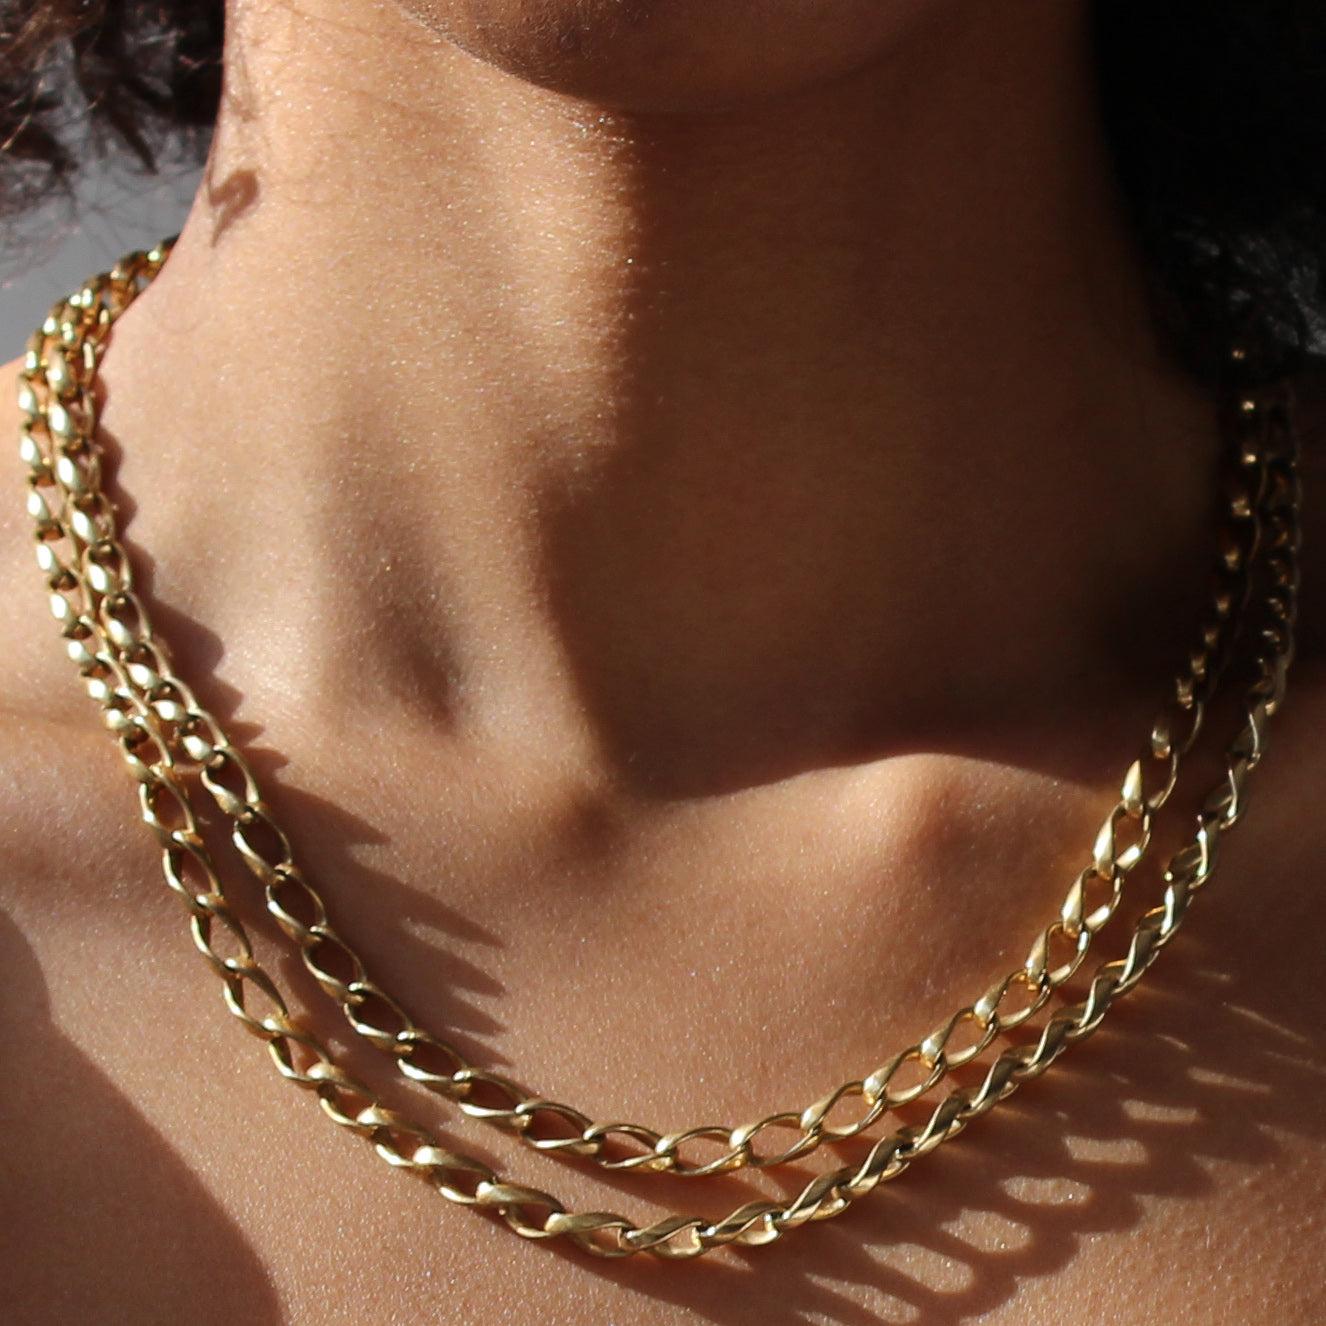 Christian Dior Vintage 1970s Necklace

A super versatile timeless cable chain from the Dior 70s archive. Crafted in Germany from high quality gold plated metal, at over 35 inches, this necklace can be worn long or doubled up for impact.

The